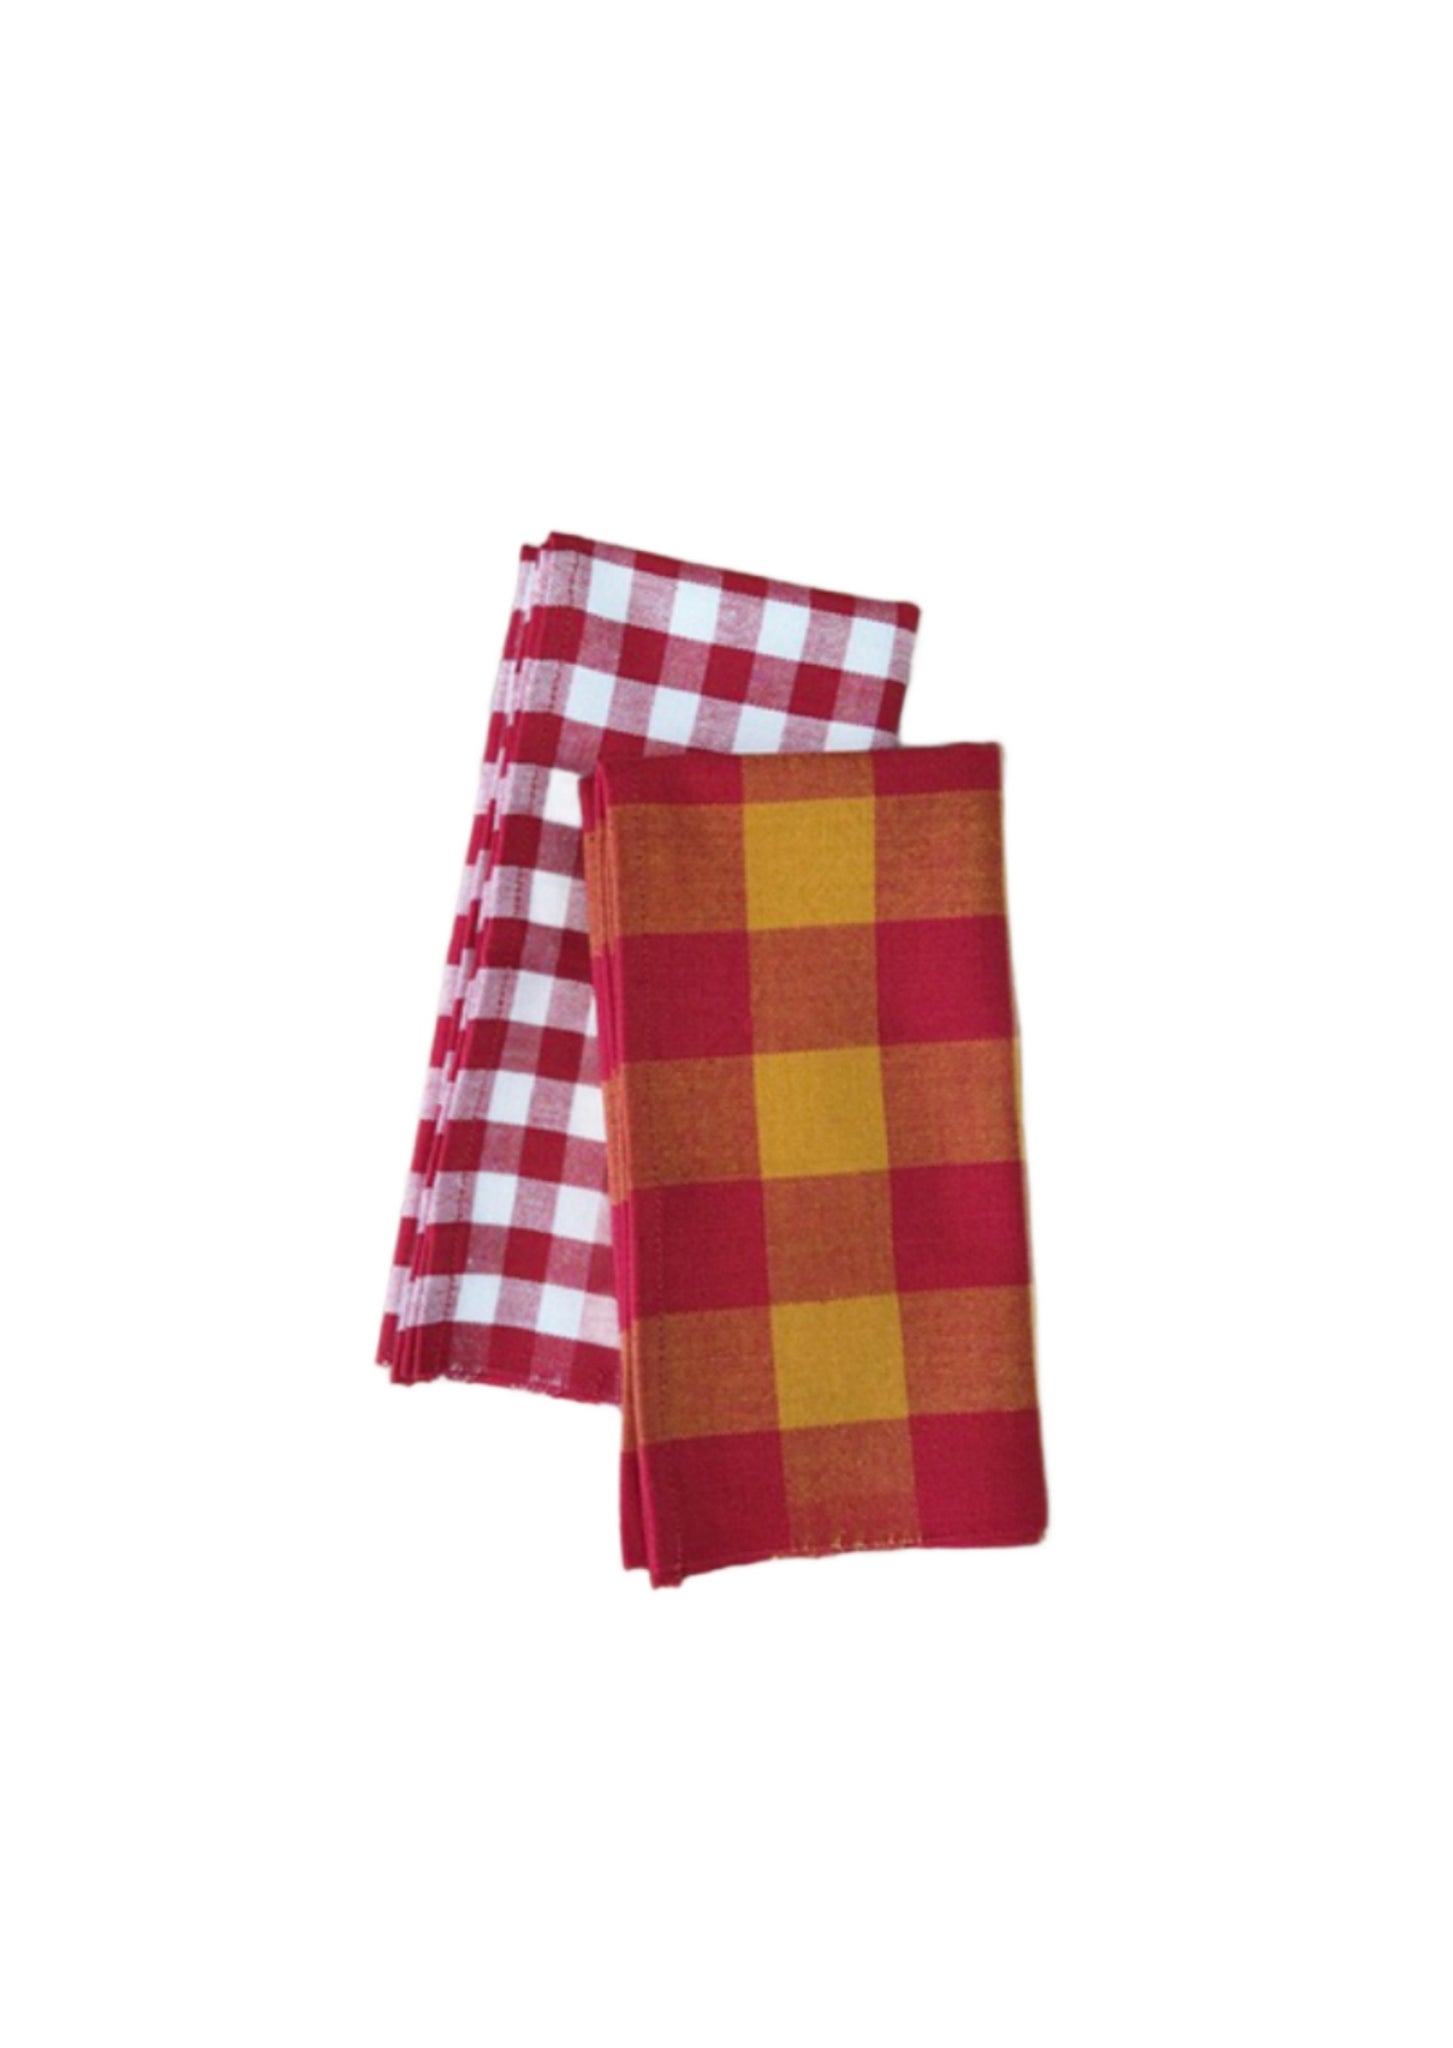 Cotton Napkin Set // Ketchup & Mustard // Not Available for In-Store Pick Up